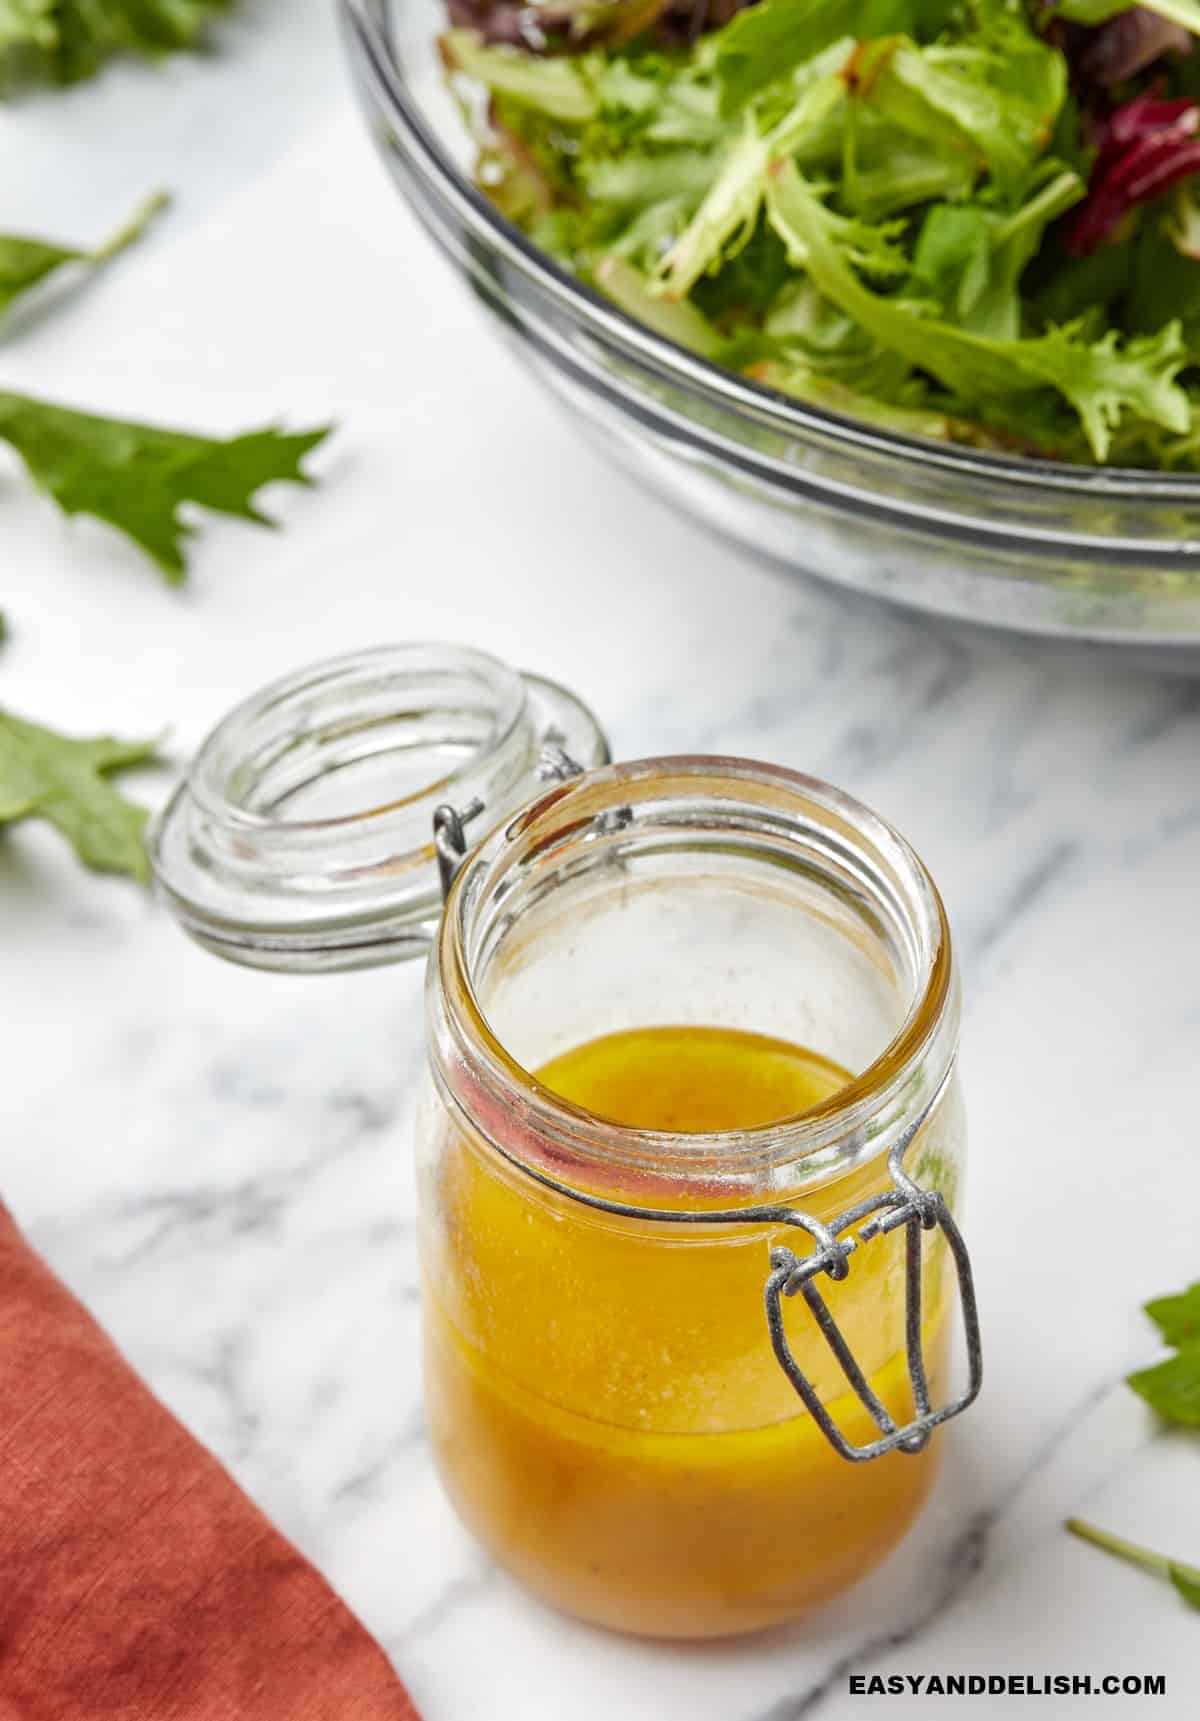 salad dressing with apple cider vinegar in a jar neat a bowl of greens.